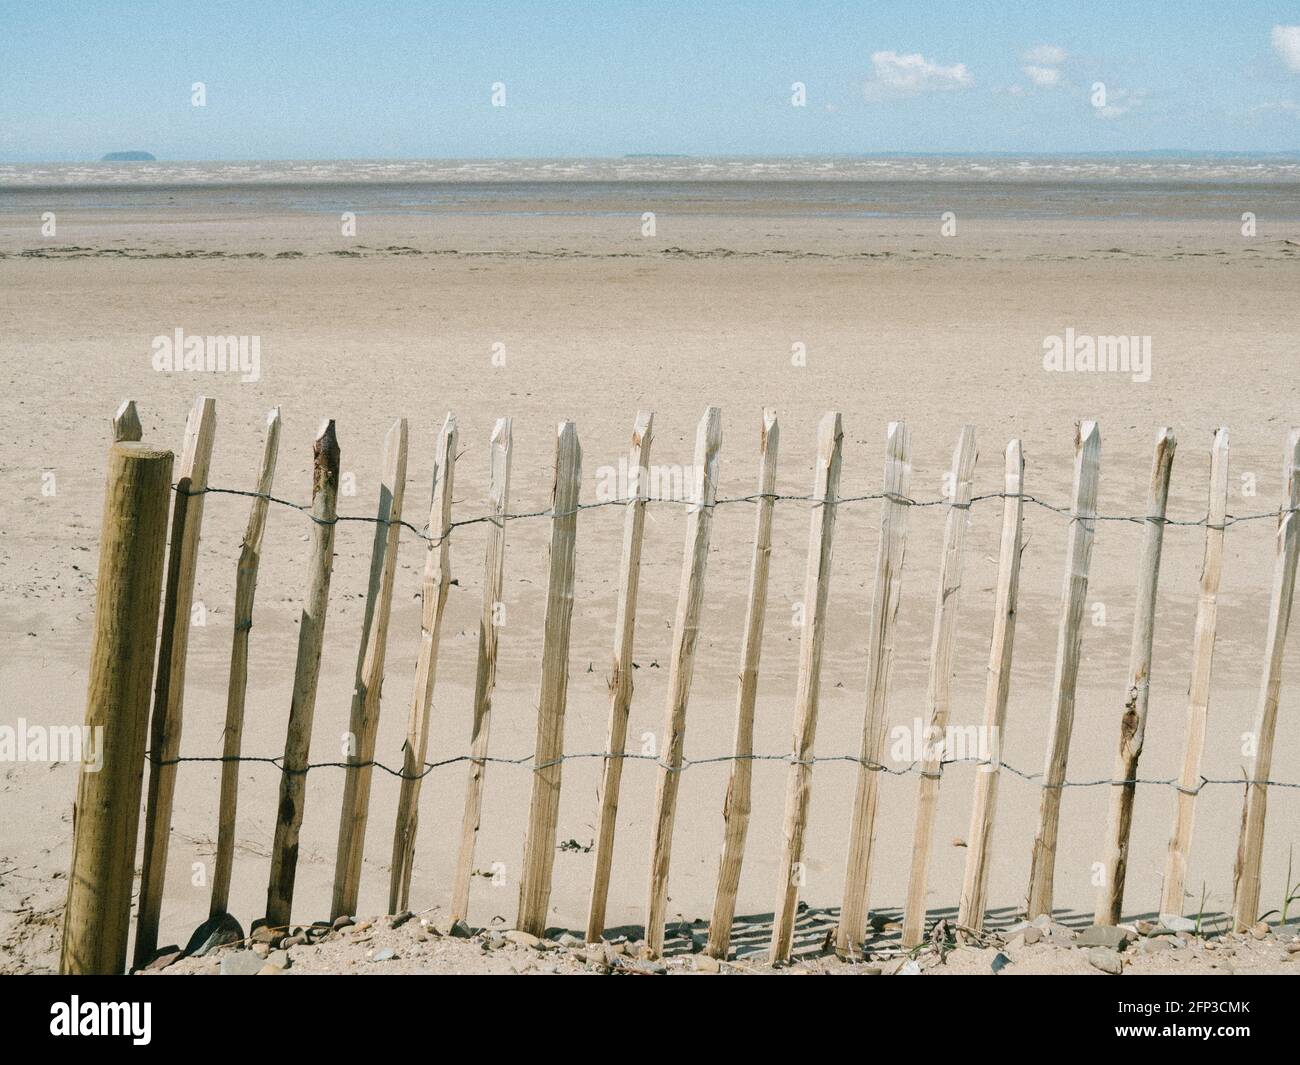 A beach fence at Sand Bay, near Weston-super-Mare, looking out towards the Bristol Channel and Steepholm Island. Stock Photo